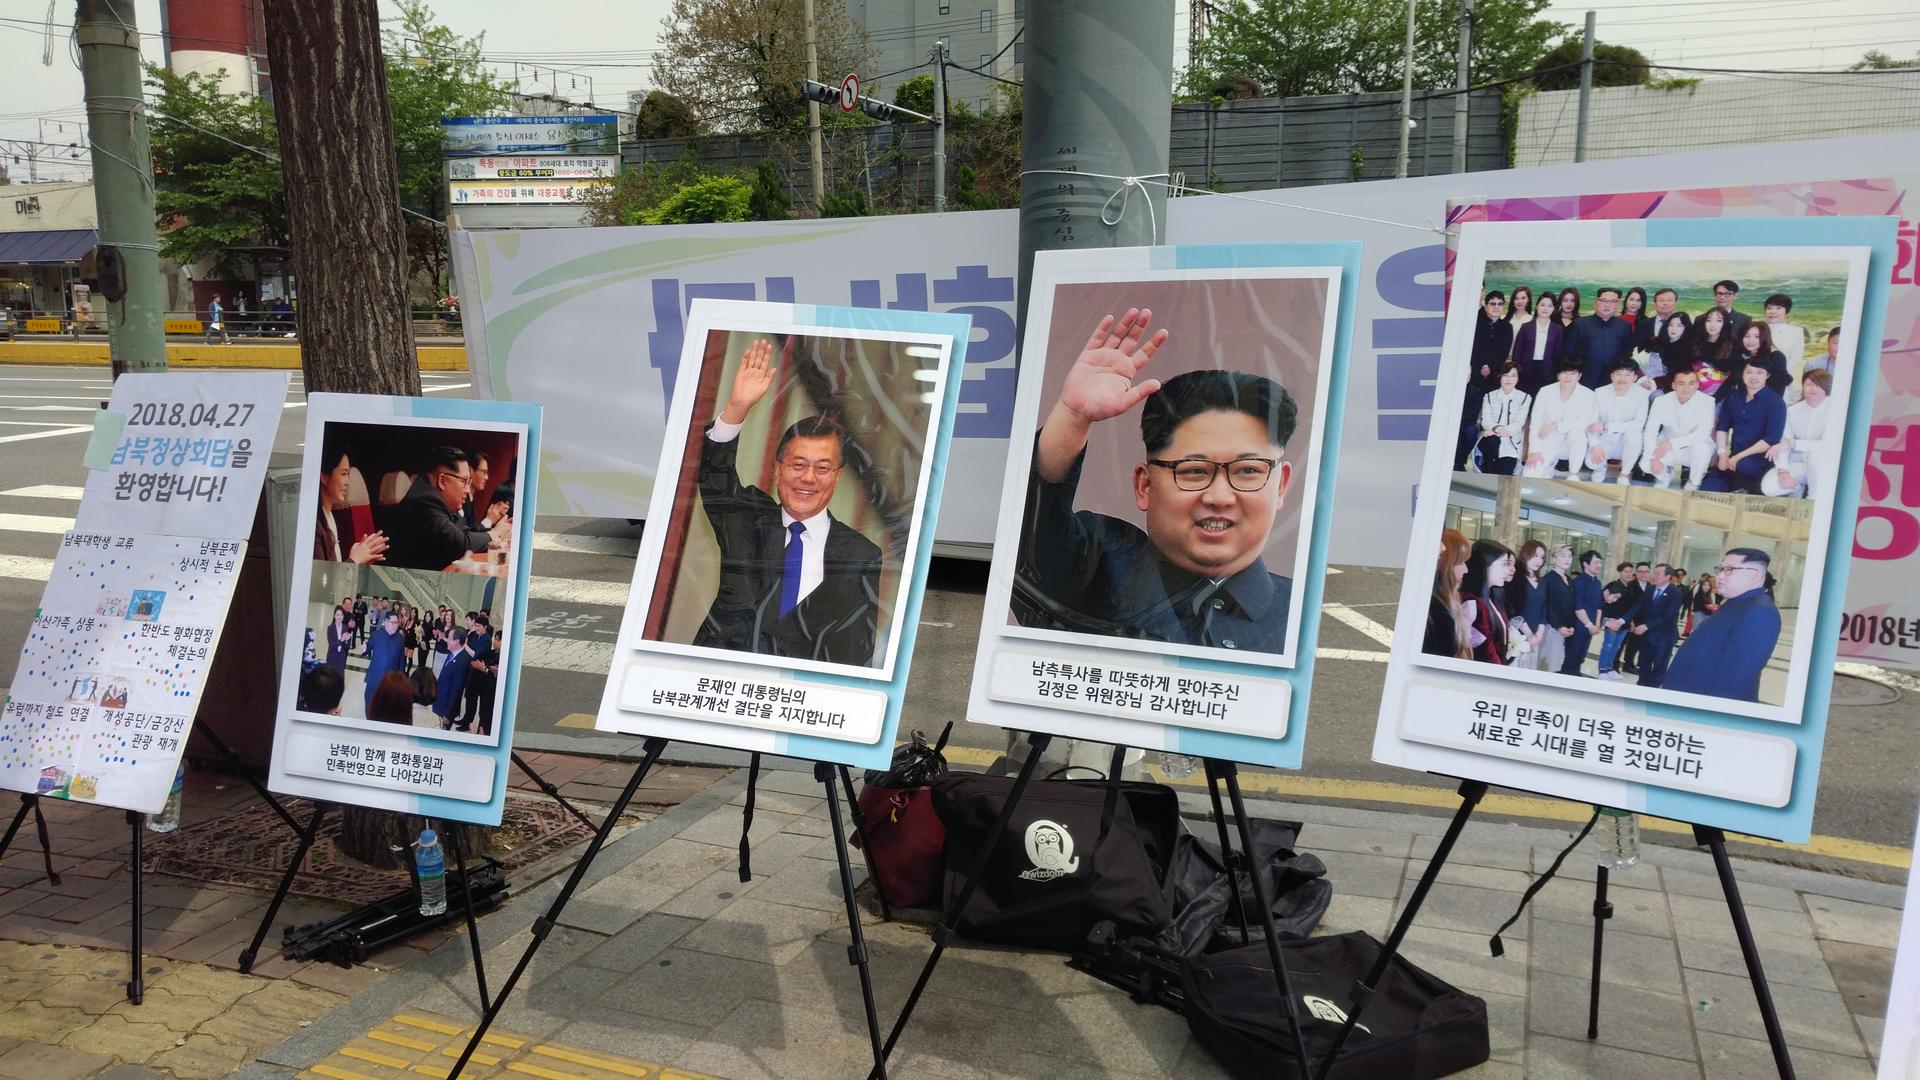 Positive signs celebrating the Inter-Korean Summit are seen near Seoul Station the day before on April 26, 2018.